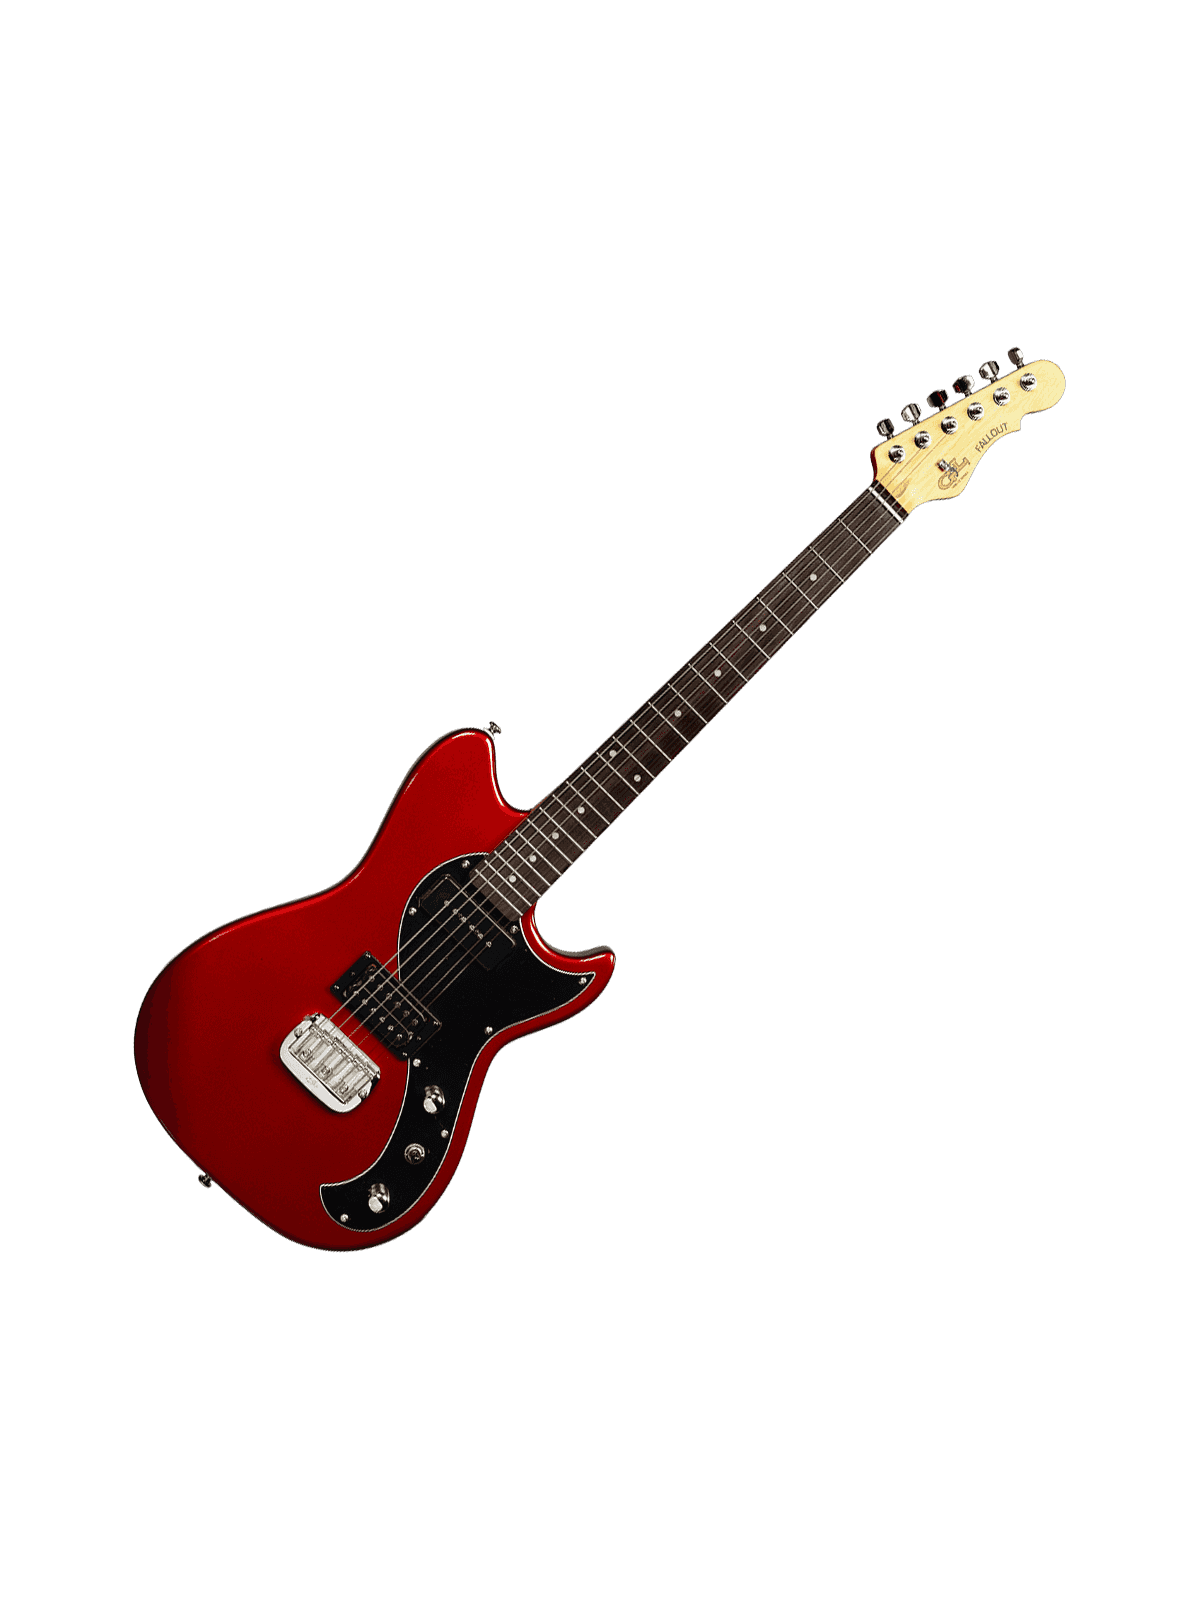 G&L - Standard - Tribute Fallout Candy Apple Red